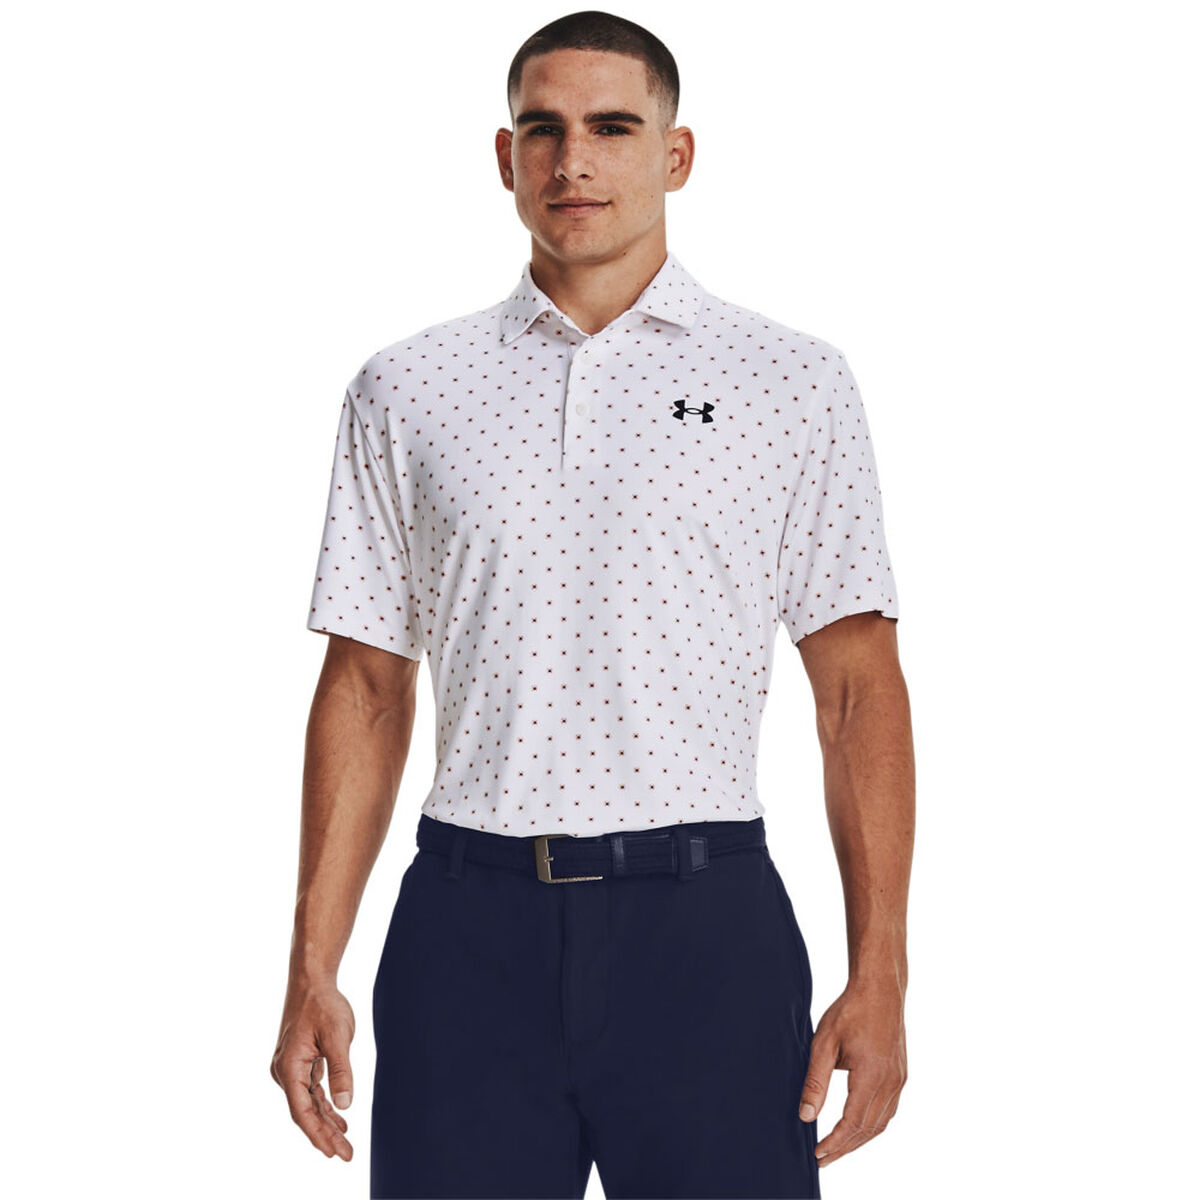 Under Armour Men’s White, Pink and Navy Blue Playoff 3.0 DG Printed Golf Polo Shirt, Size: Large | American Golf